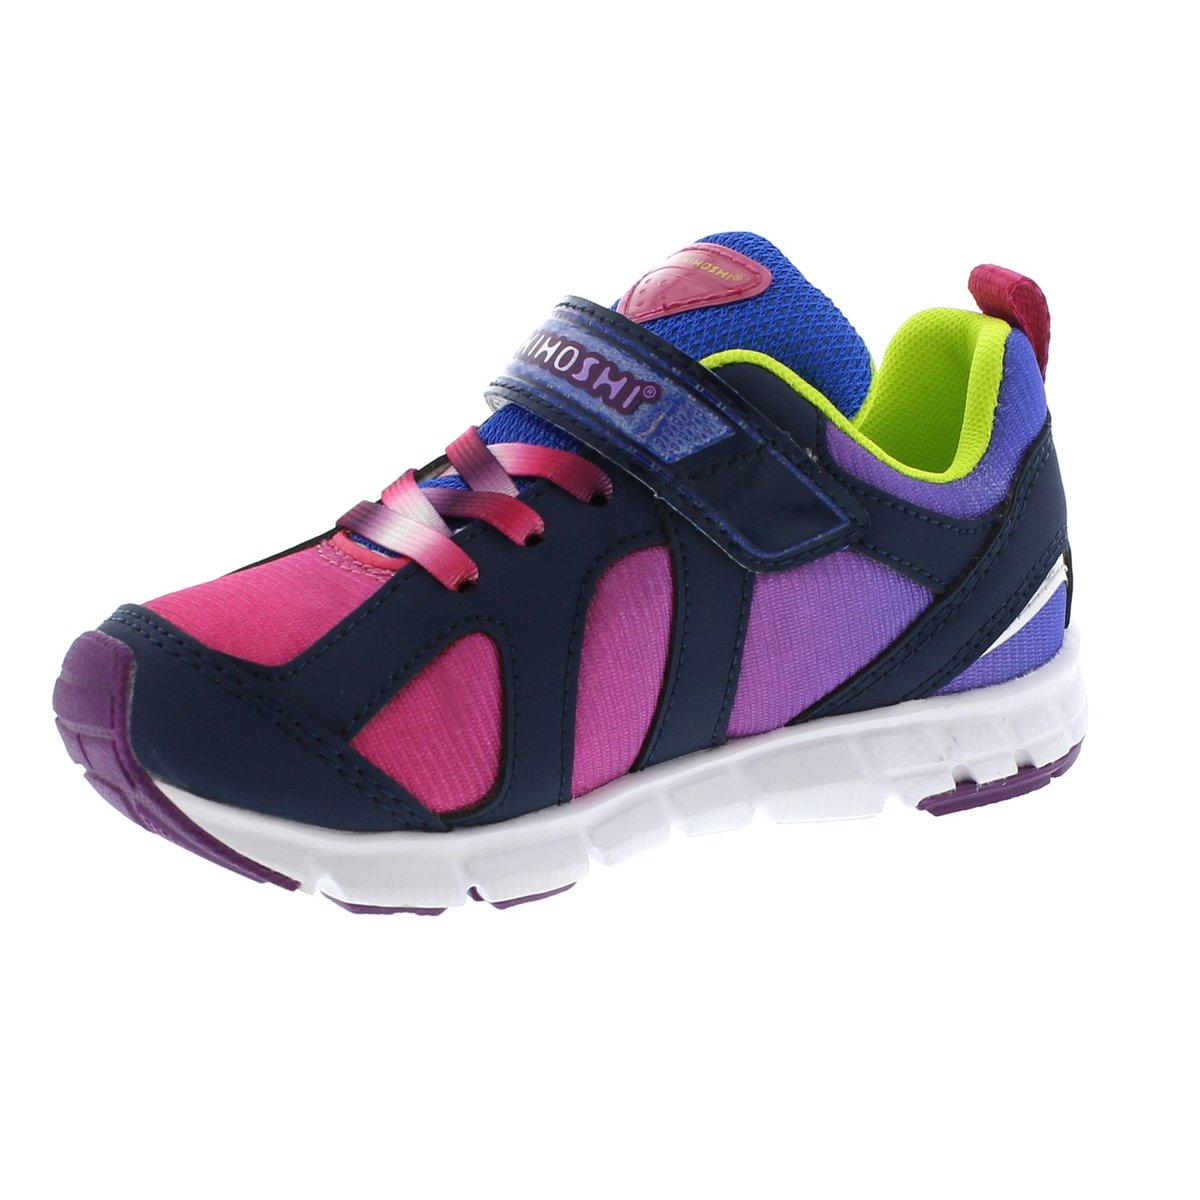 Child Tsukihoshi Rainbow Sneaker in Navy/Fuchsia from the front view